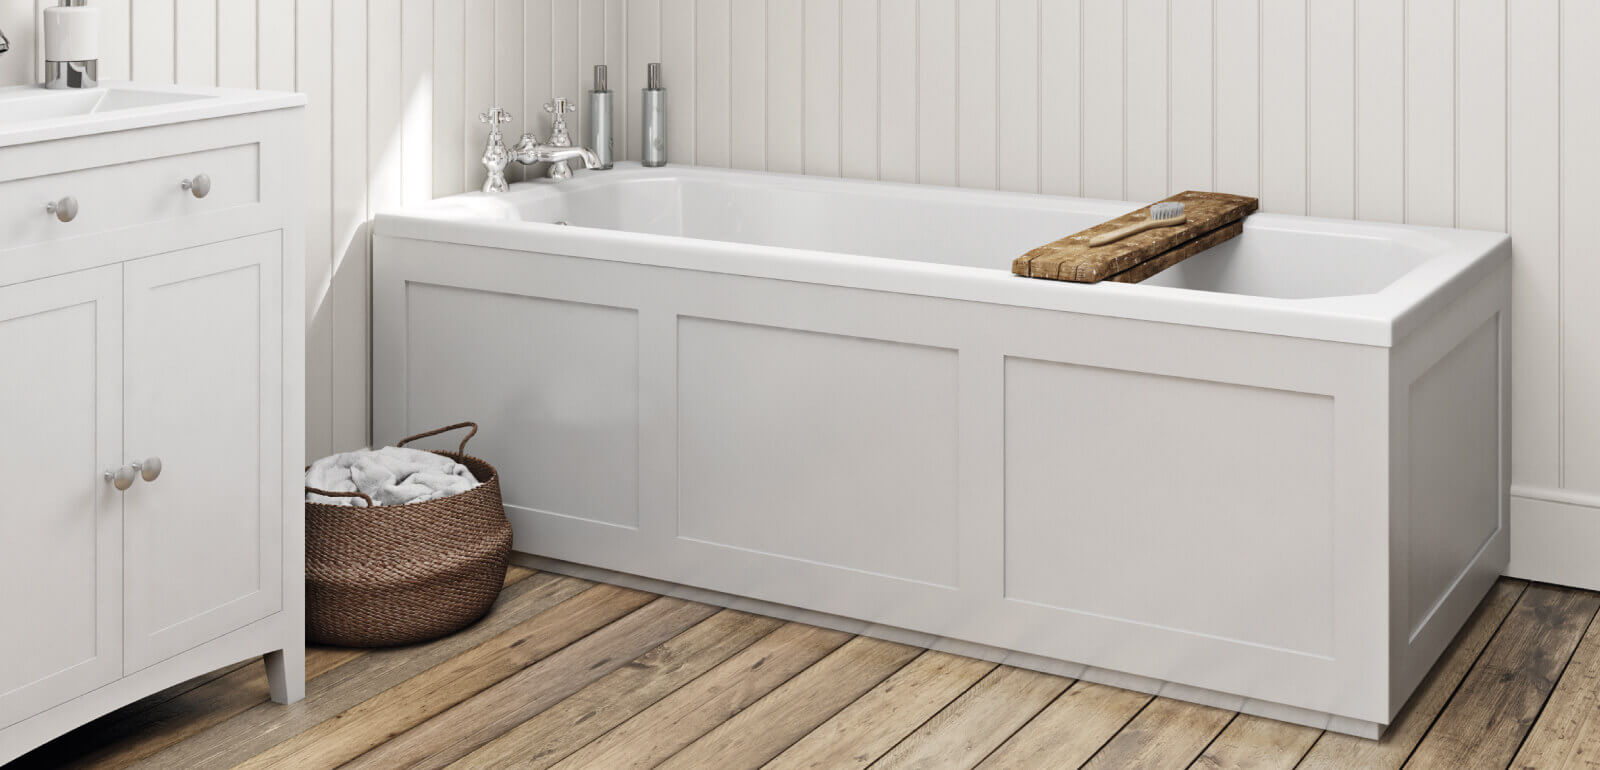 7 Best Types Of Bathtubs Prices, Styles, Pros & Cons